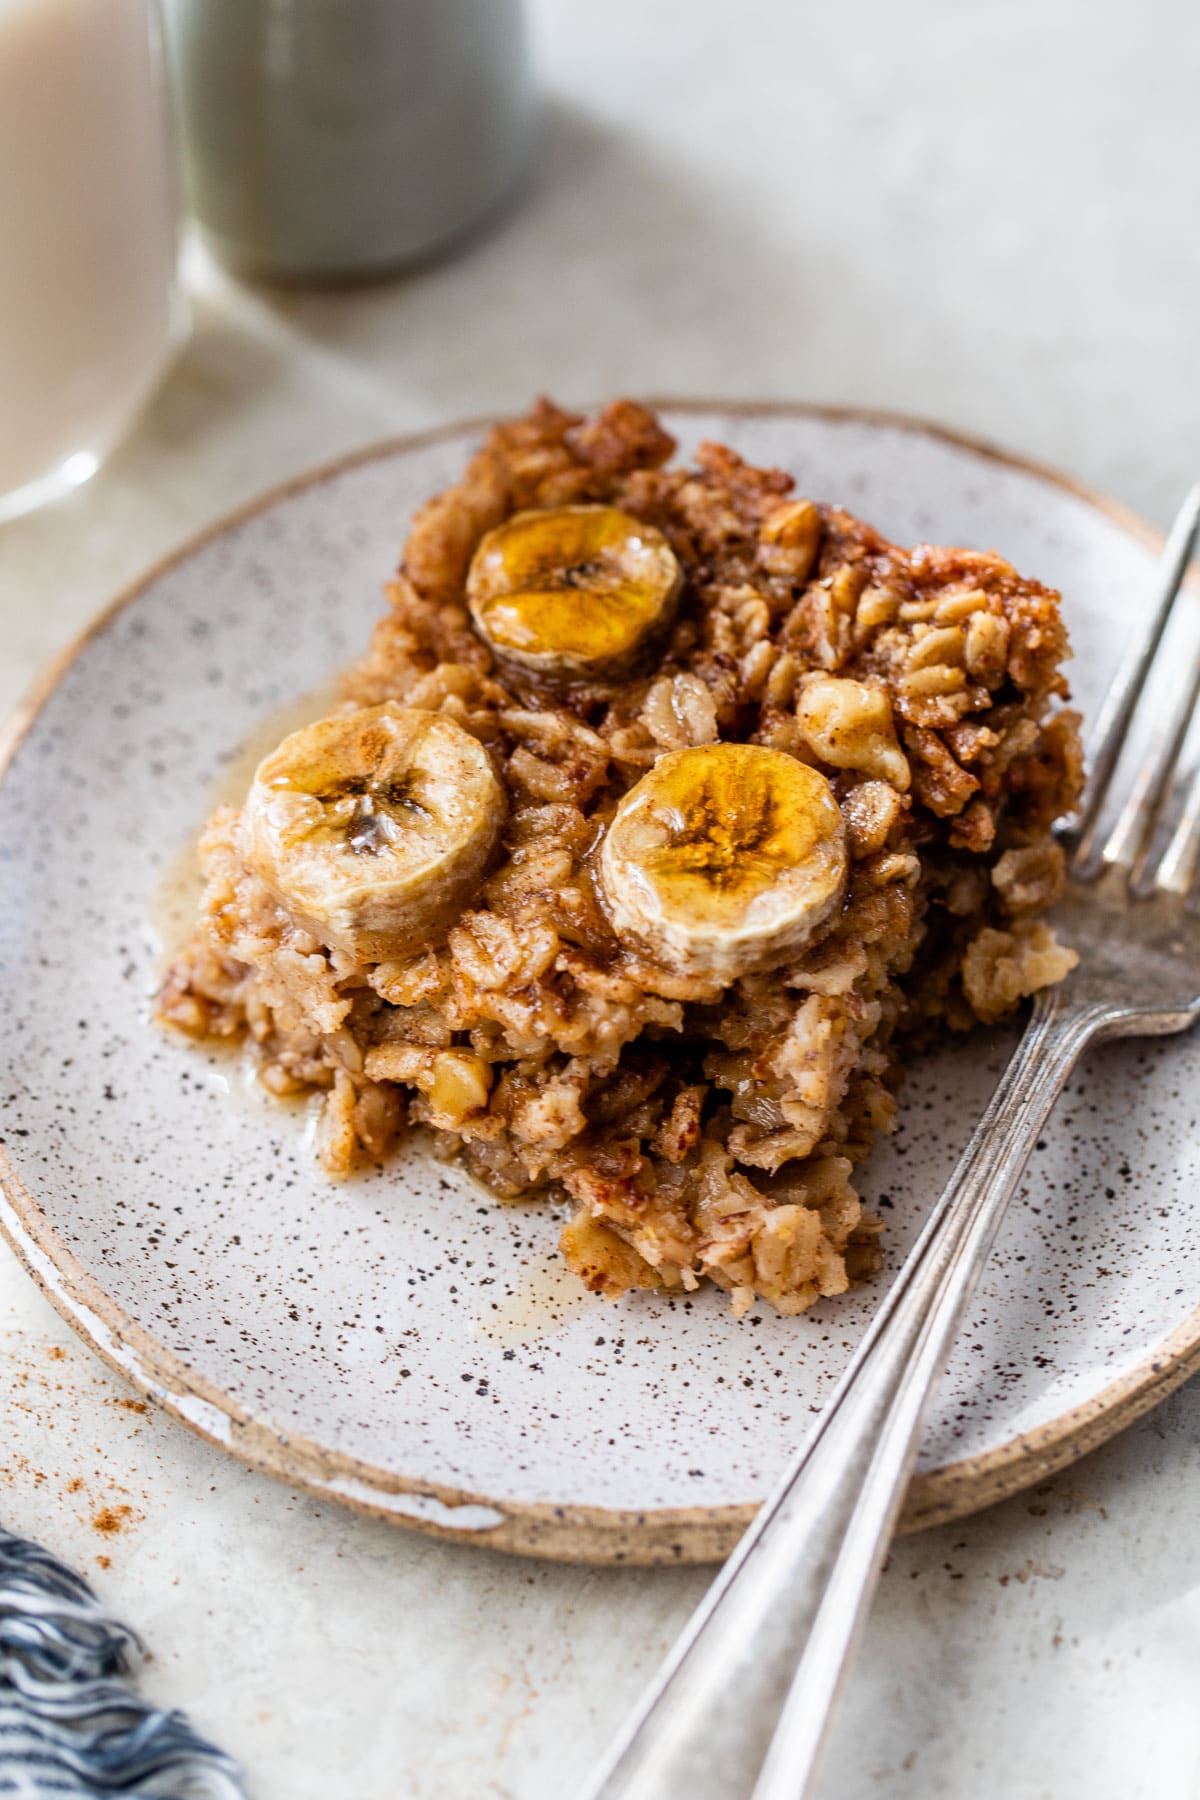 a piece of baked oatmeal on a plate topped with sliced banana